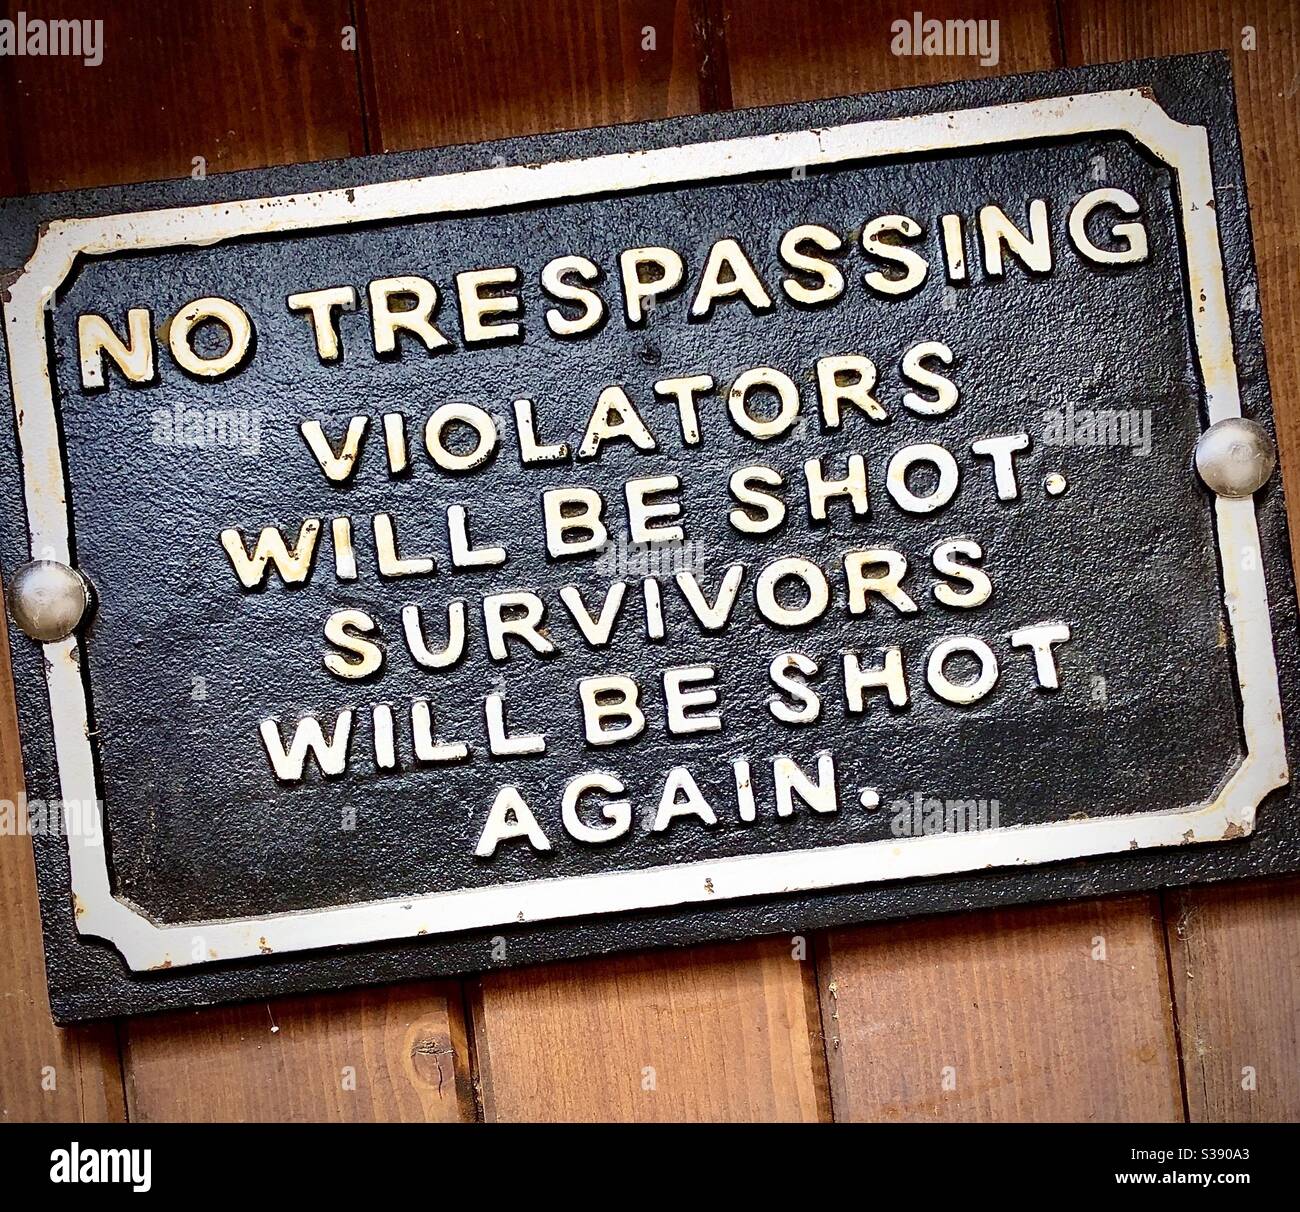 Cast-iron plaque trespass warning notice, with added humour. Stock Photo